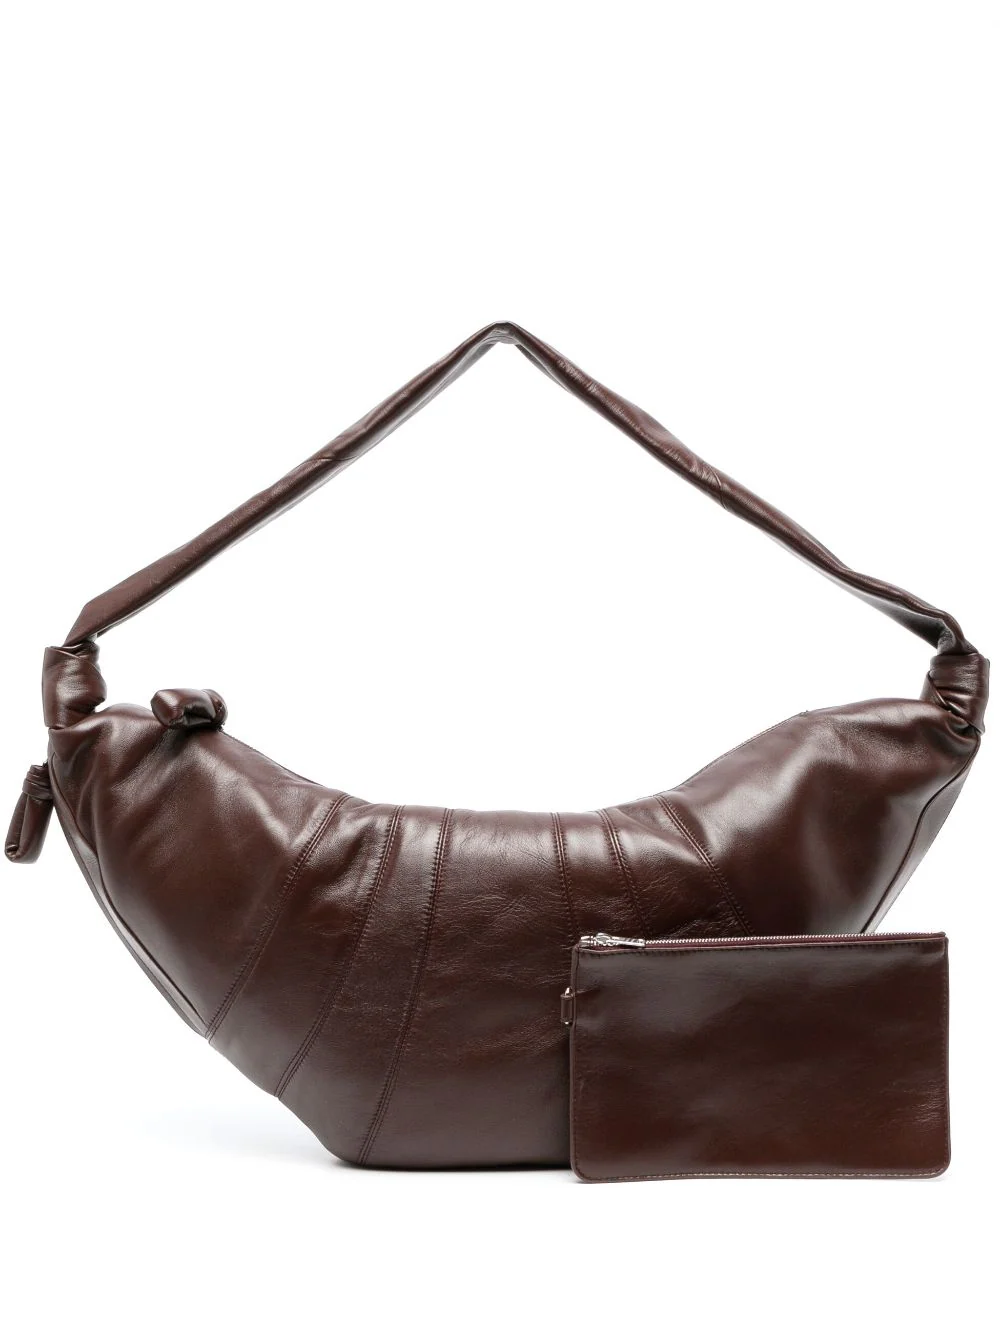 LEMAIRE Soft Nappa Leather Large Croissant Bag